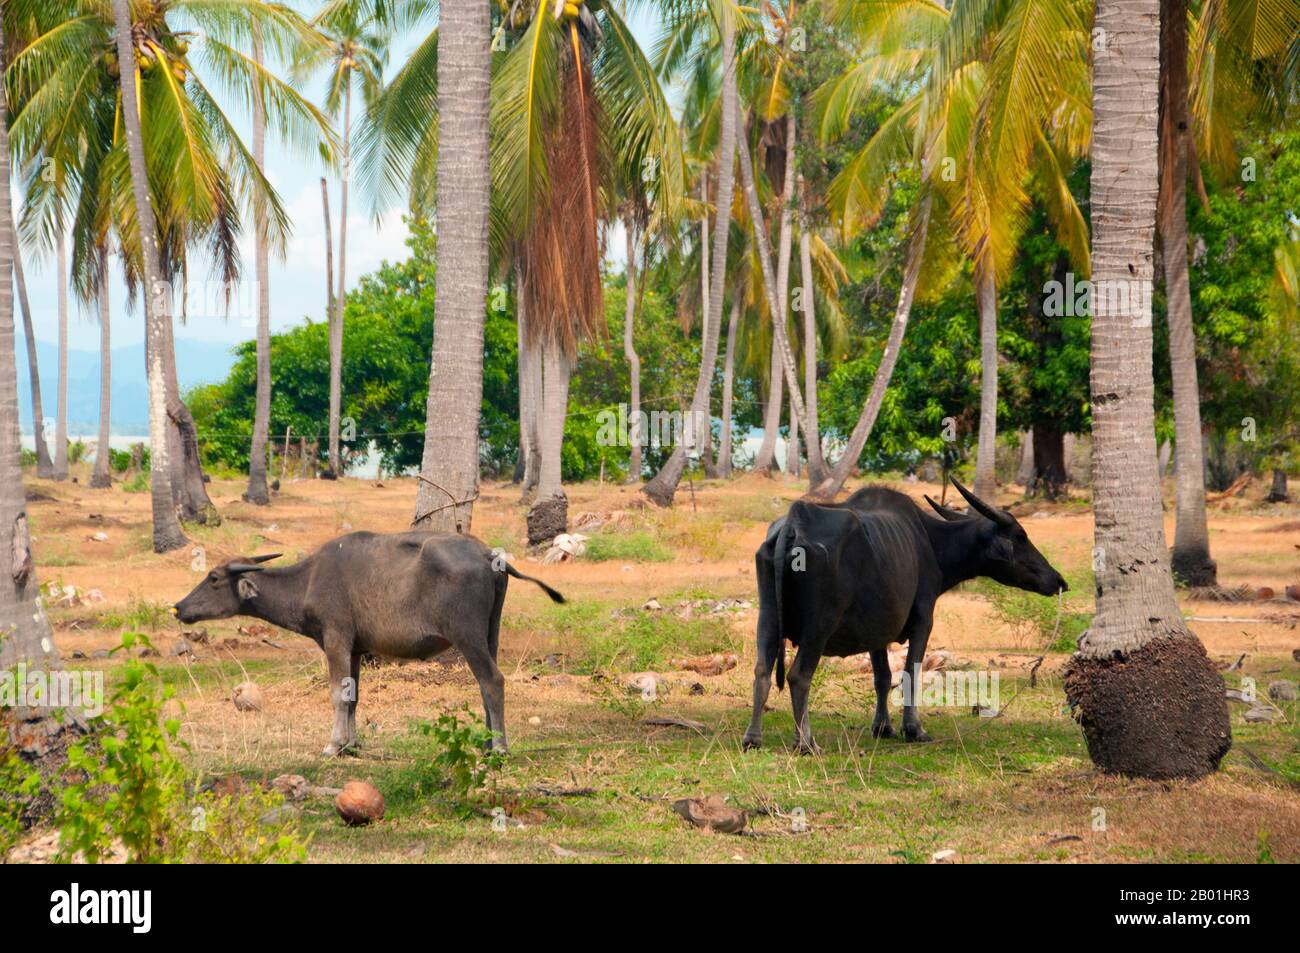 Thailand: Buffaloes in coconut palm grove, Ko Sukorn, Trang Province.  Ko Sukorn is home to around 2,500 Thai Muslims, mainly fishing families, but also farmers growing coconuts, rice and rubber in the island’s fertile interior.  Trang province was dependent on tin mining until the first rubber seedlings were brought into Thailand around 1901 – part of a long journey from South America via the neighbouring Malay States.  Rubber, palm oil and fishing are the mainstays of the province's economy. Tourism is making an increasing impact as Trang’s Andaman Coast and islands are developed. Stock Photo